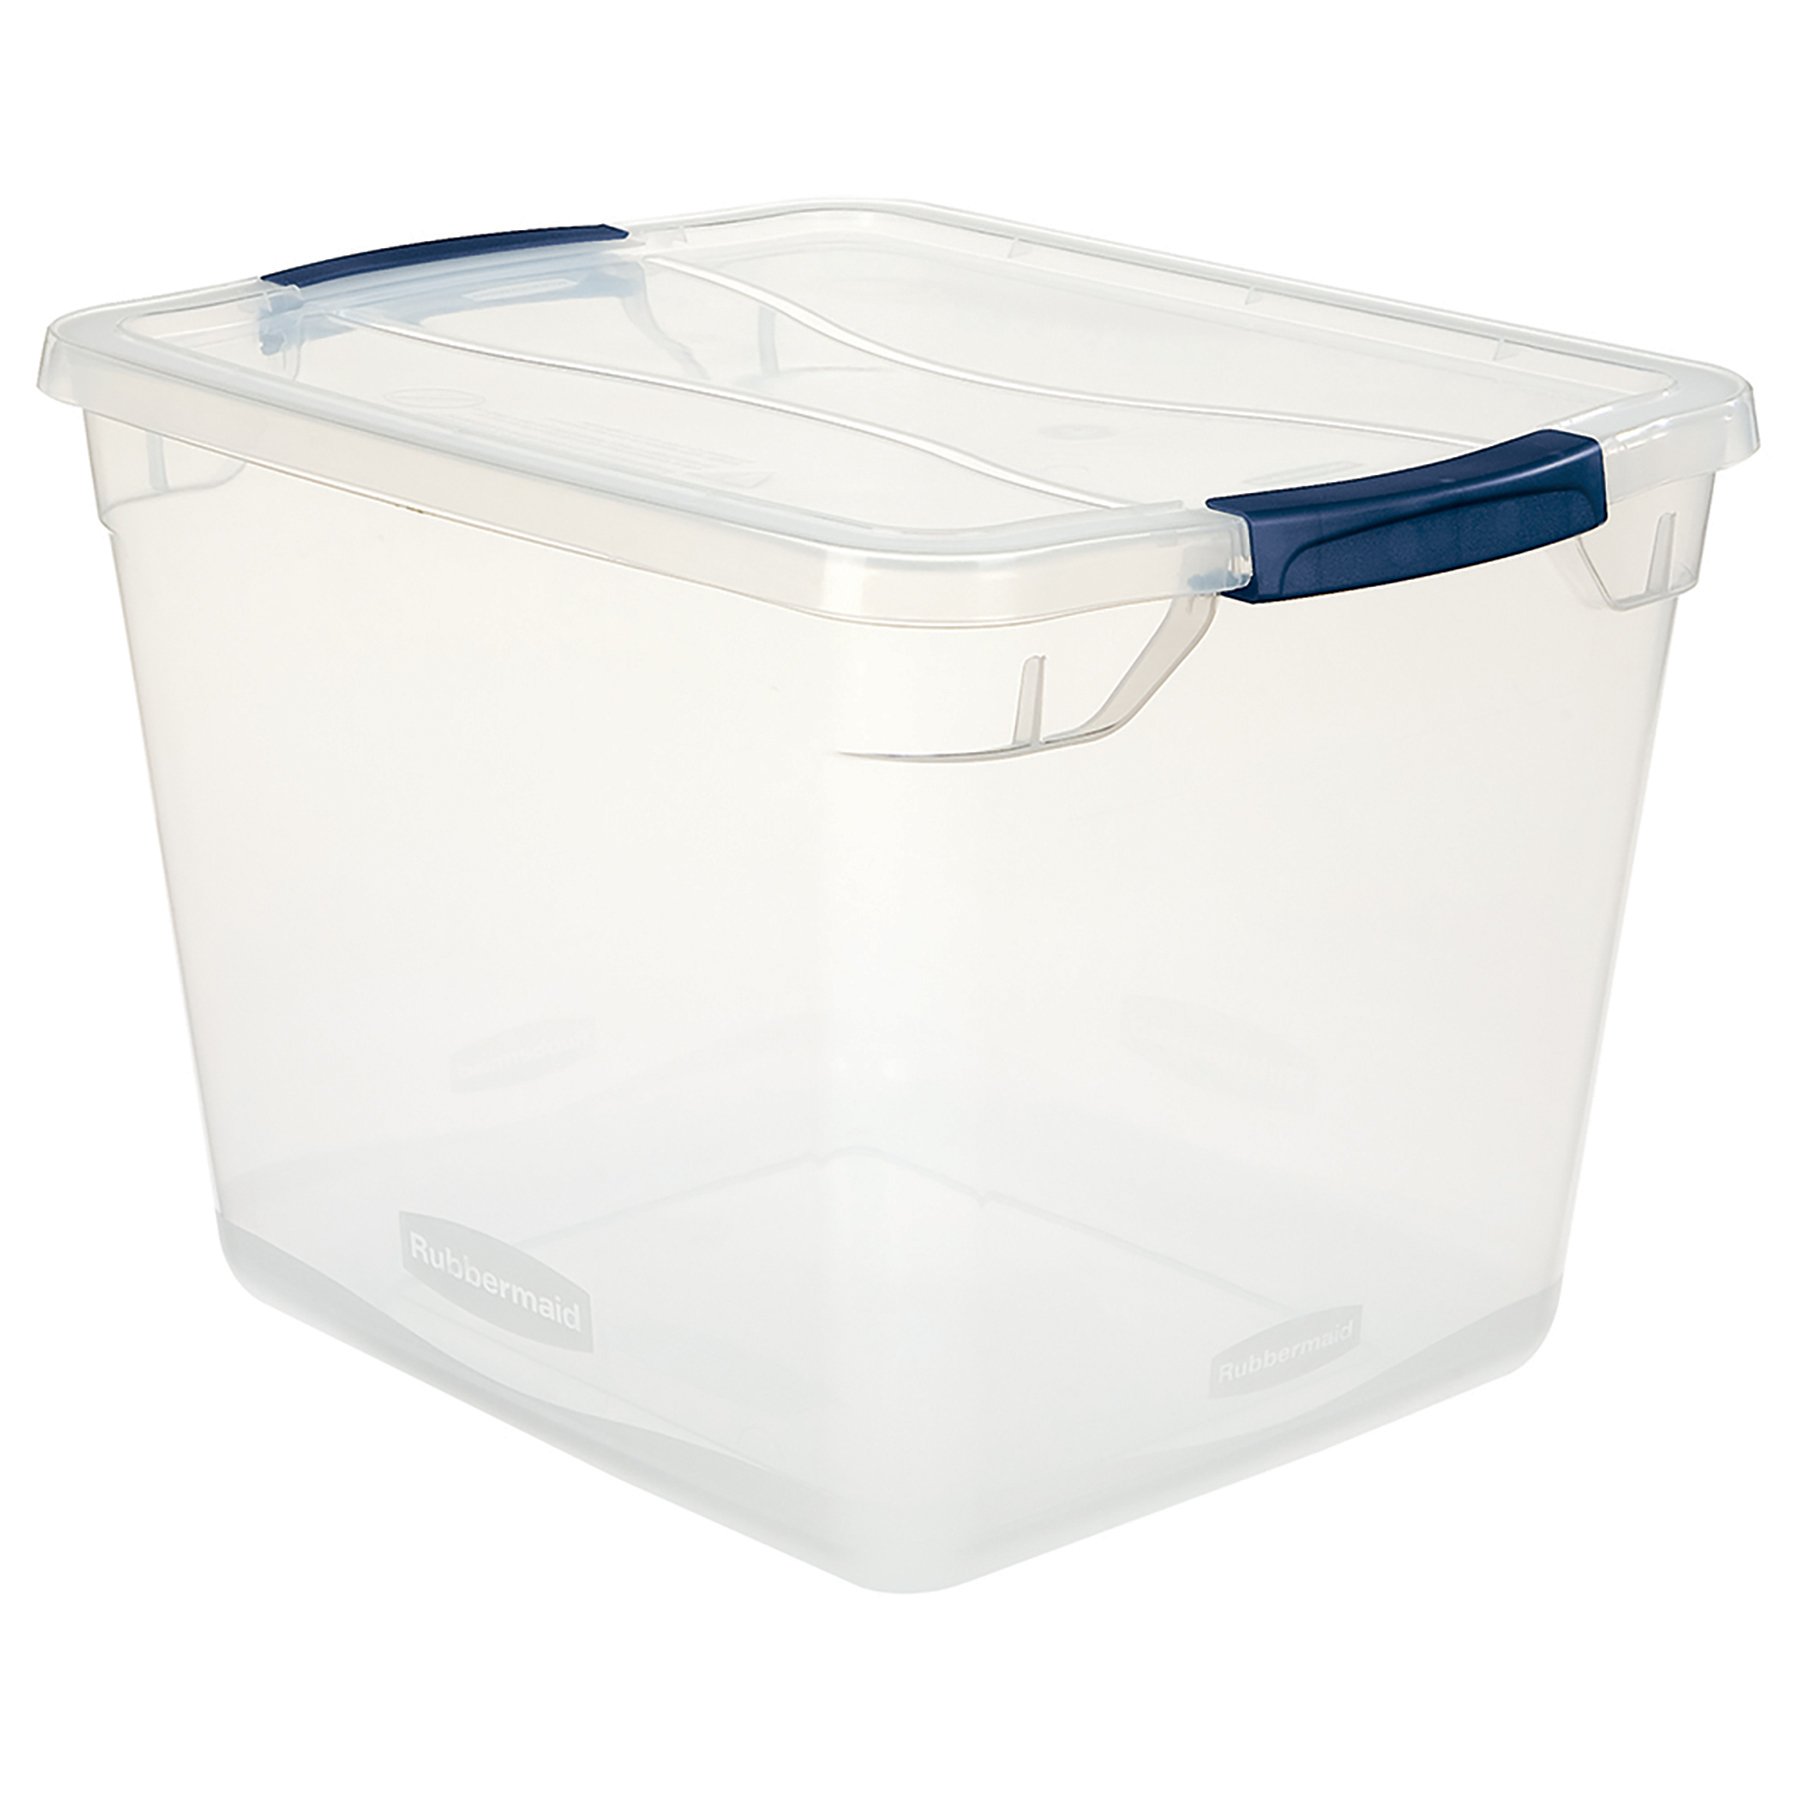 Rubbermaid Clever Store Latching Storage Tote Container, Clear, 30-Qt  (FG3Q2500CLMCB)